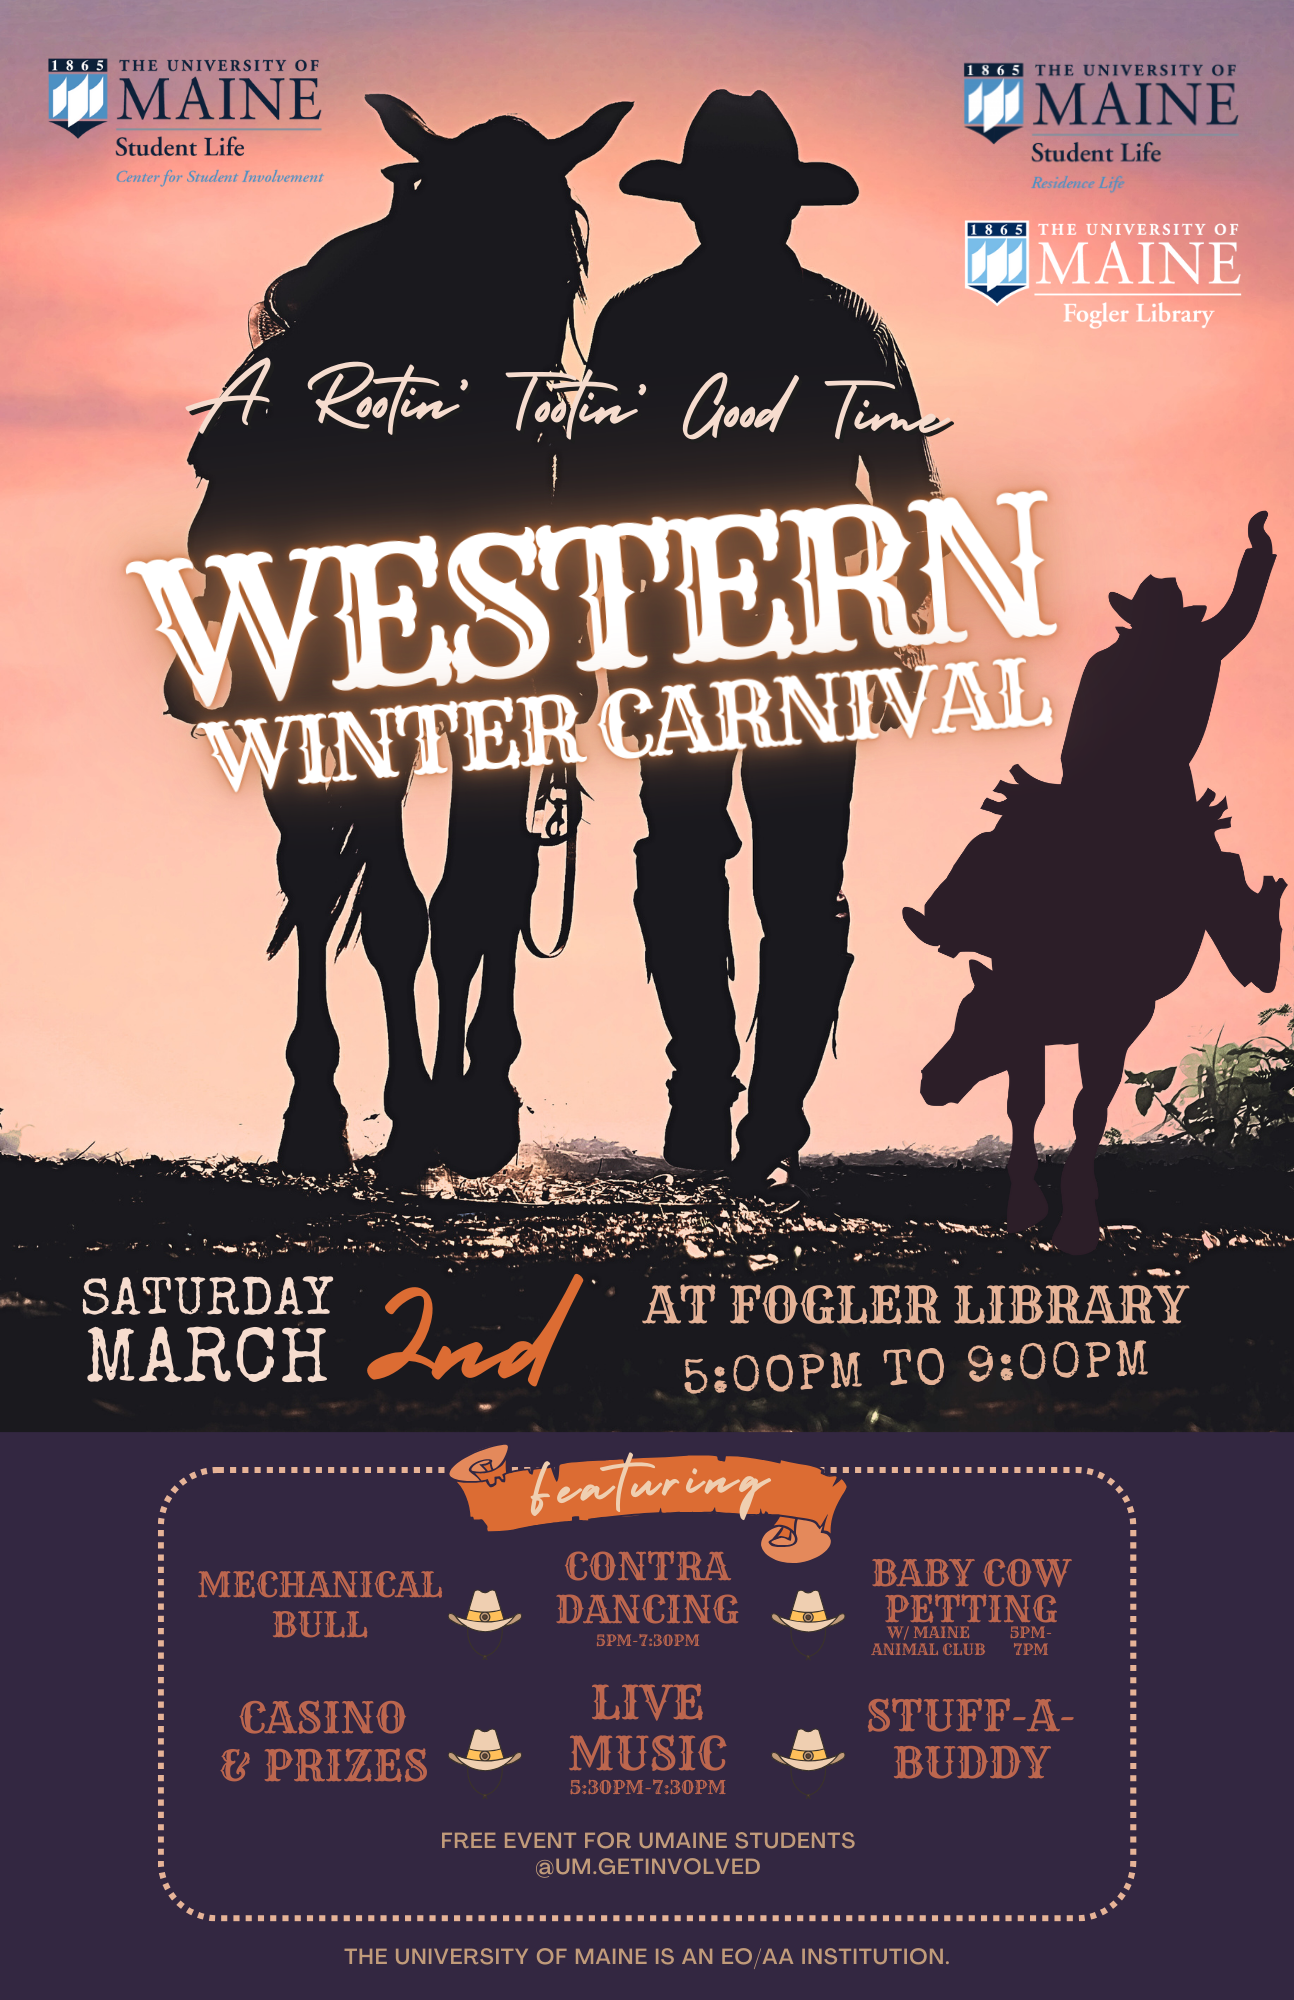 Flyer with information about the Western Winter Carnival.